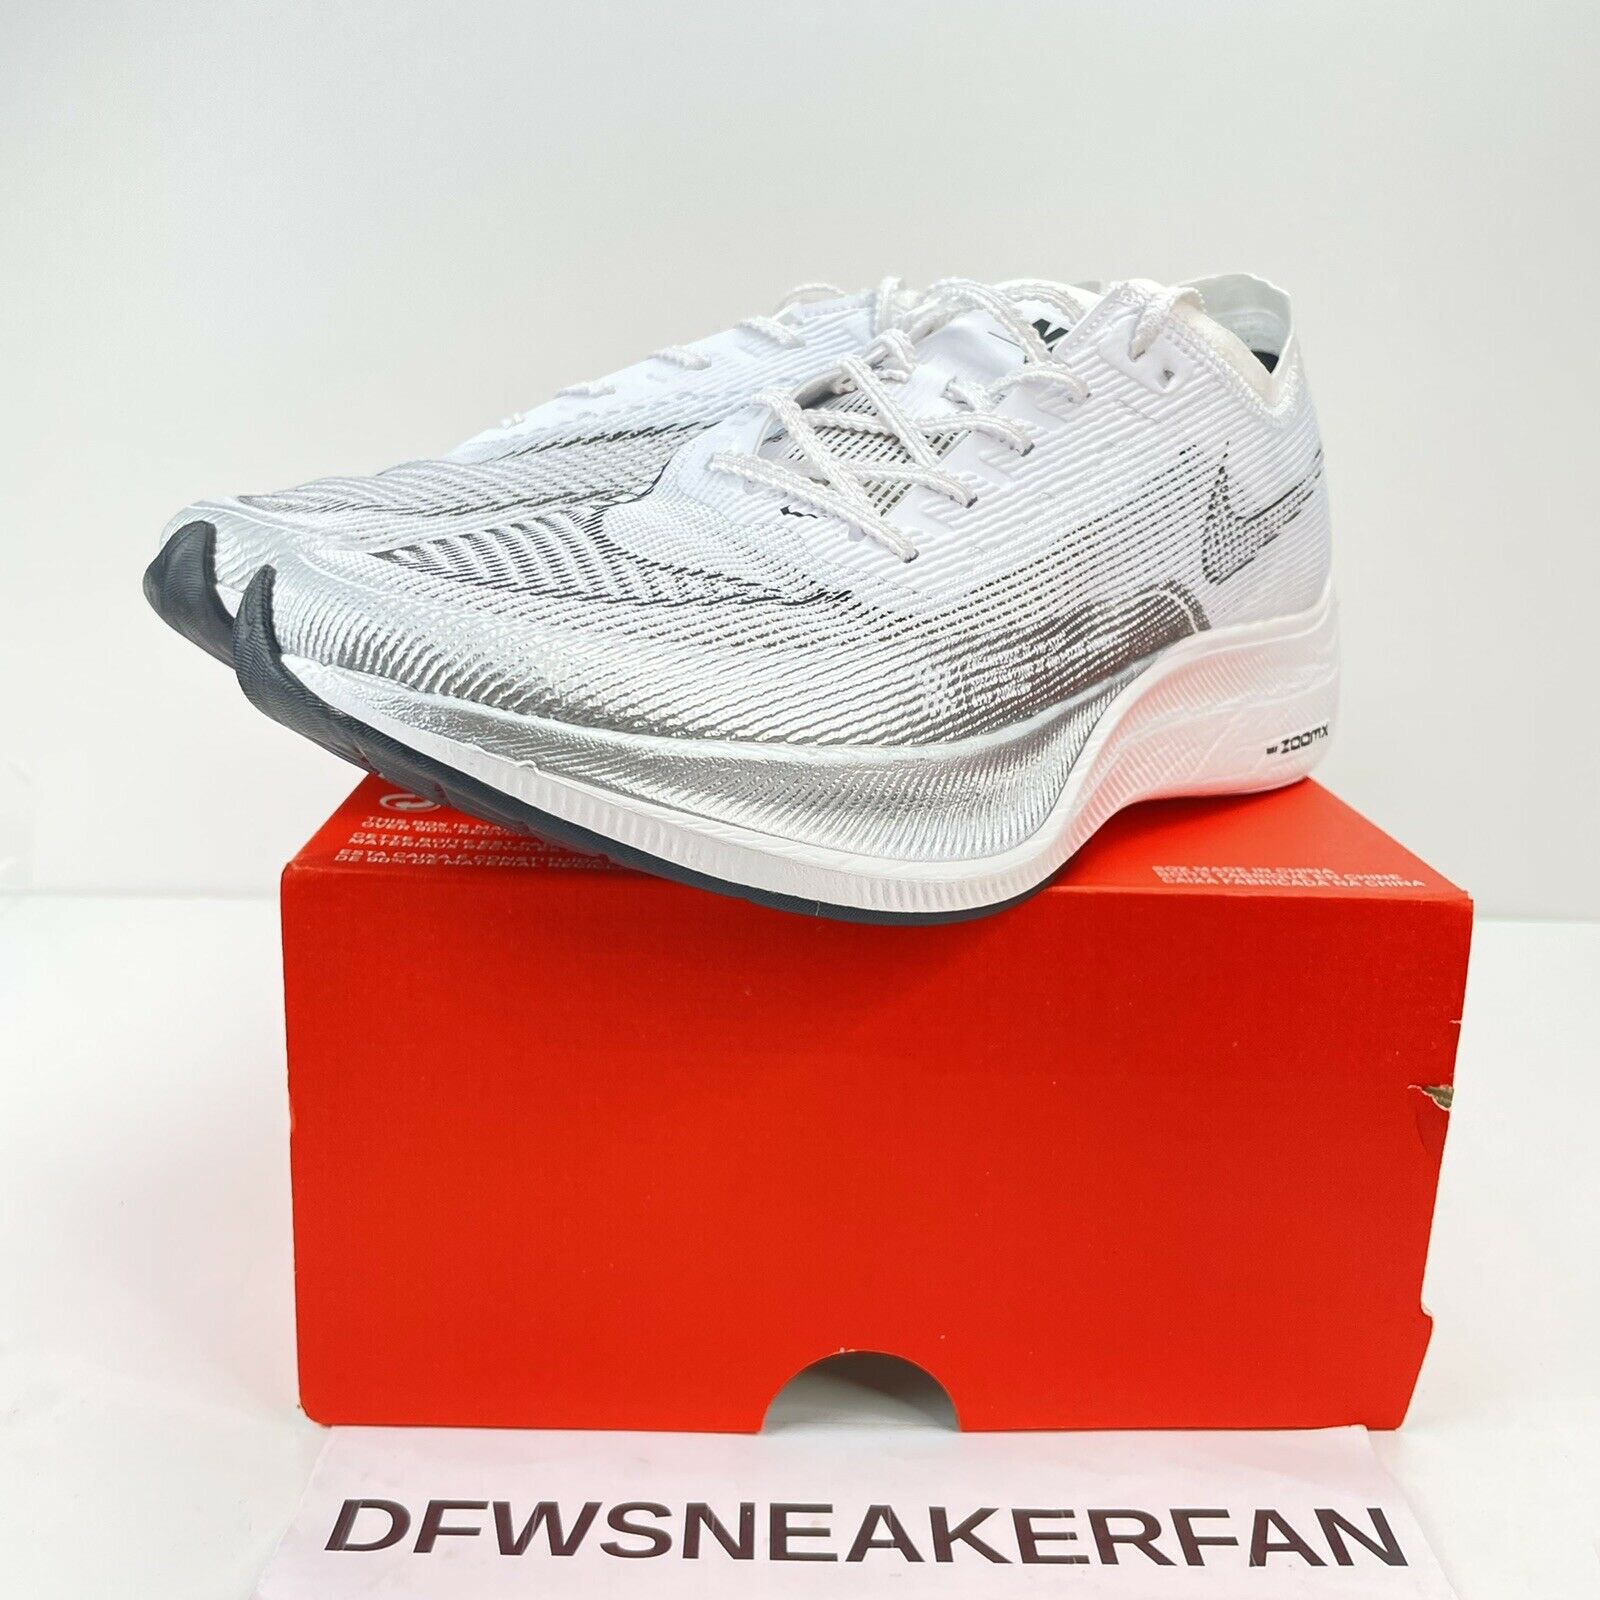 Nike ZoomX Vaporfly Next% 2 CU4111-100 Men’s 12 White Silver Shoes New